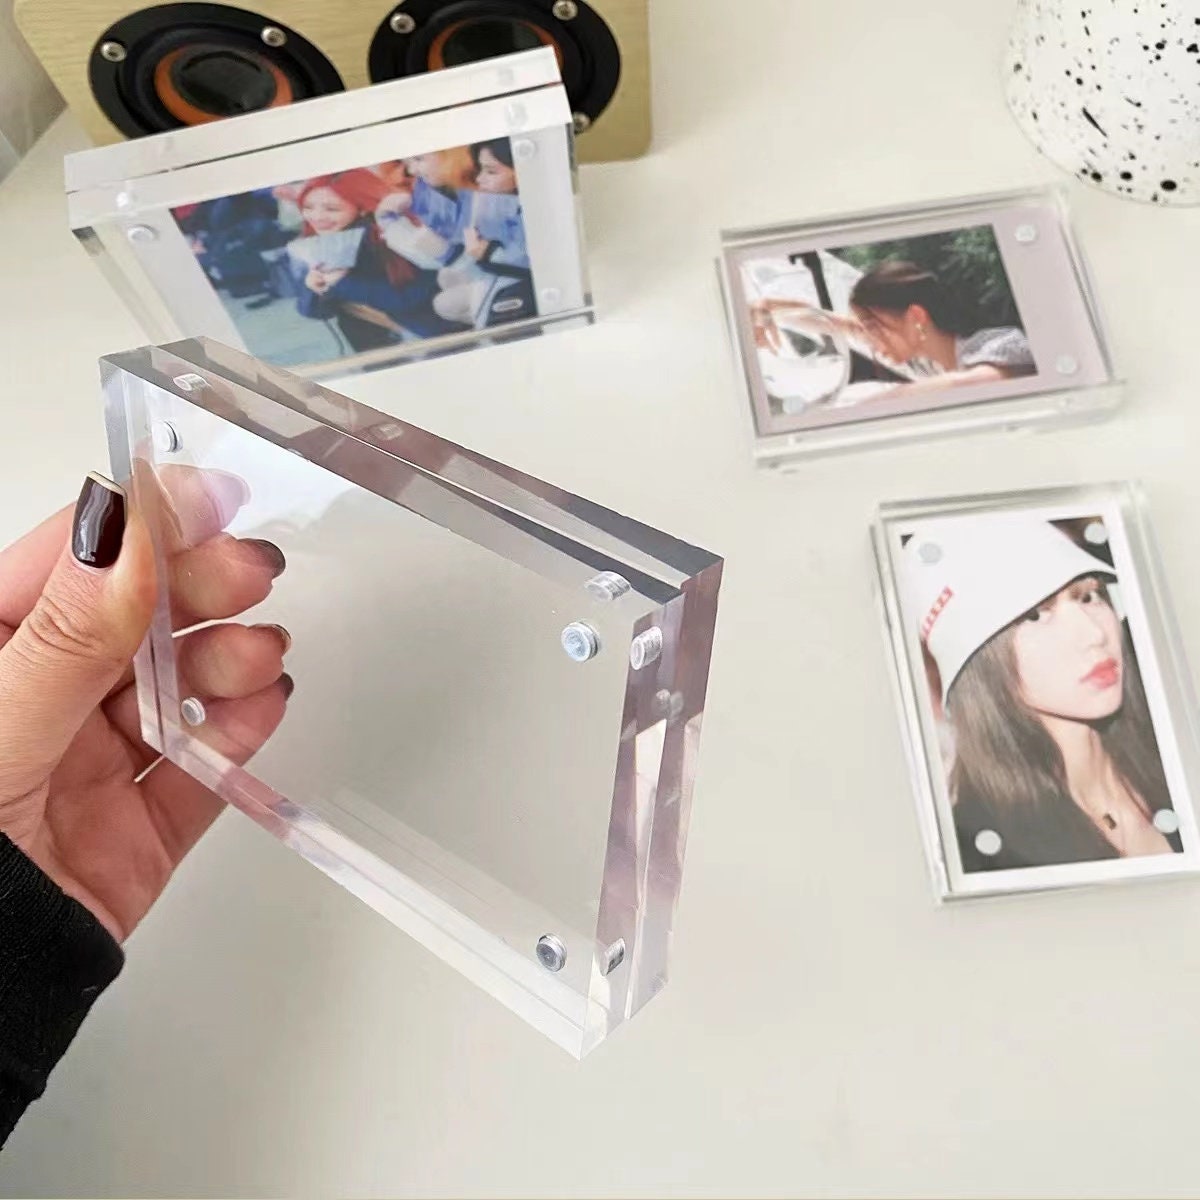 10 Pack A4 Photo Album Clear Sleeves 4 X 6 Inch Toploader